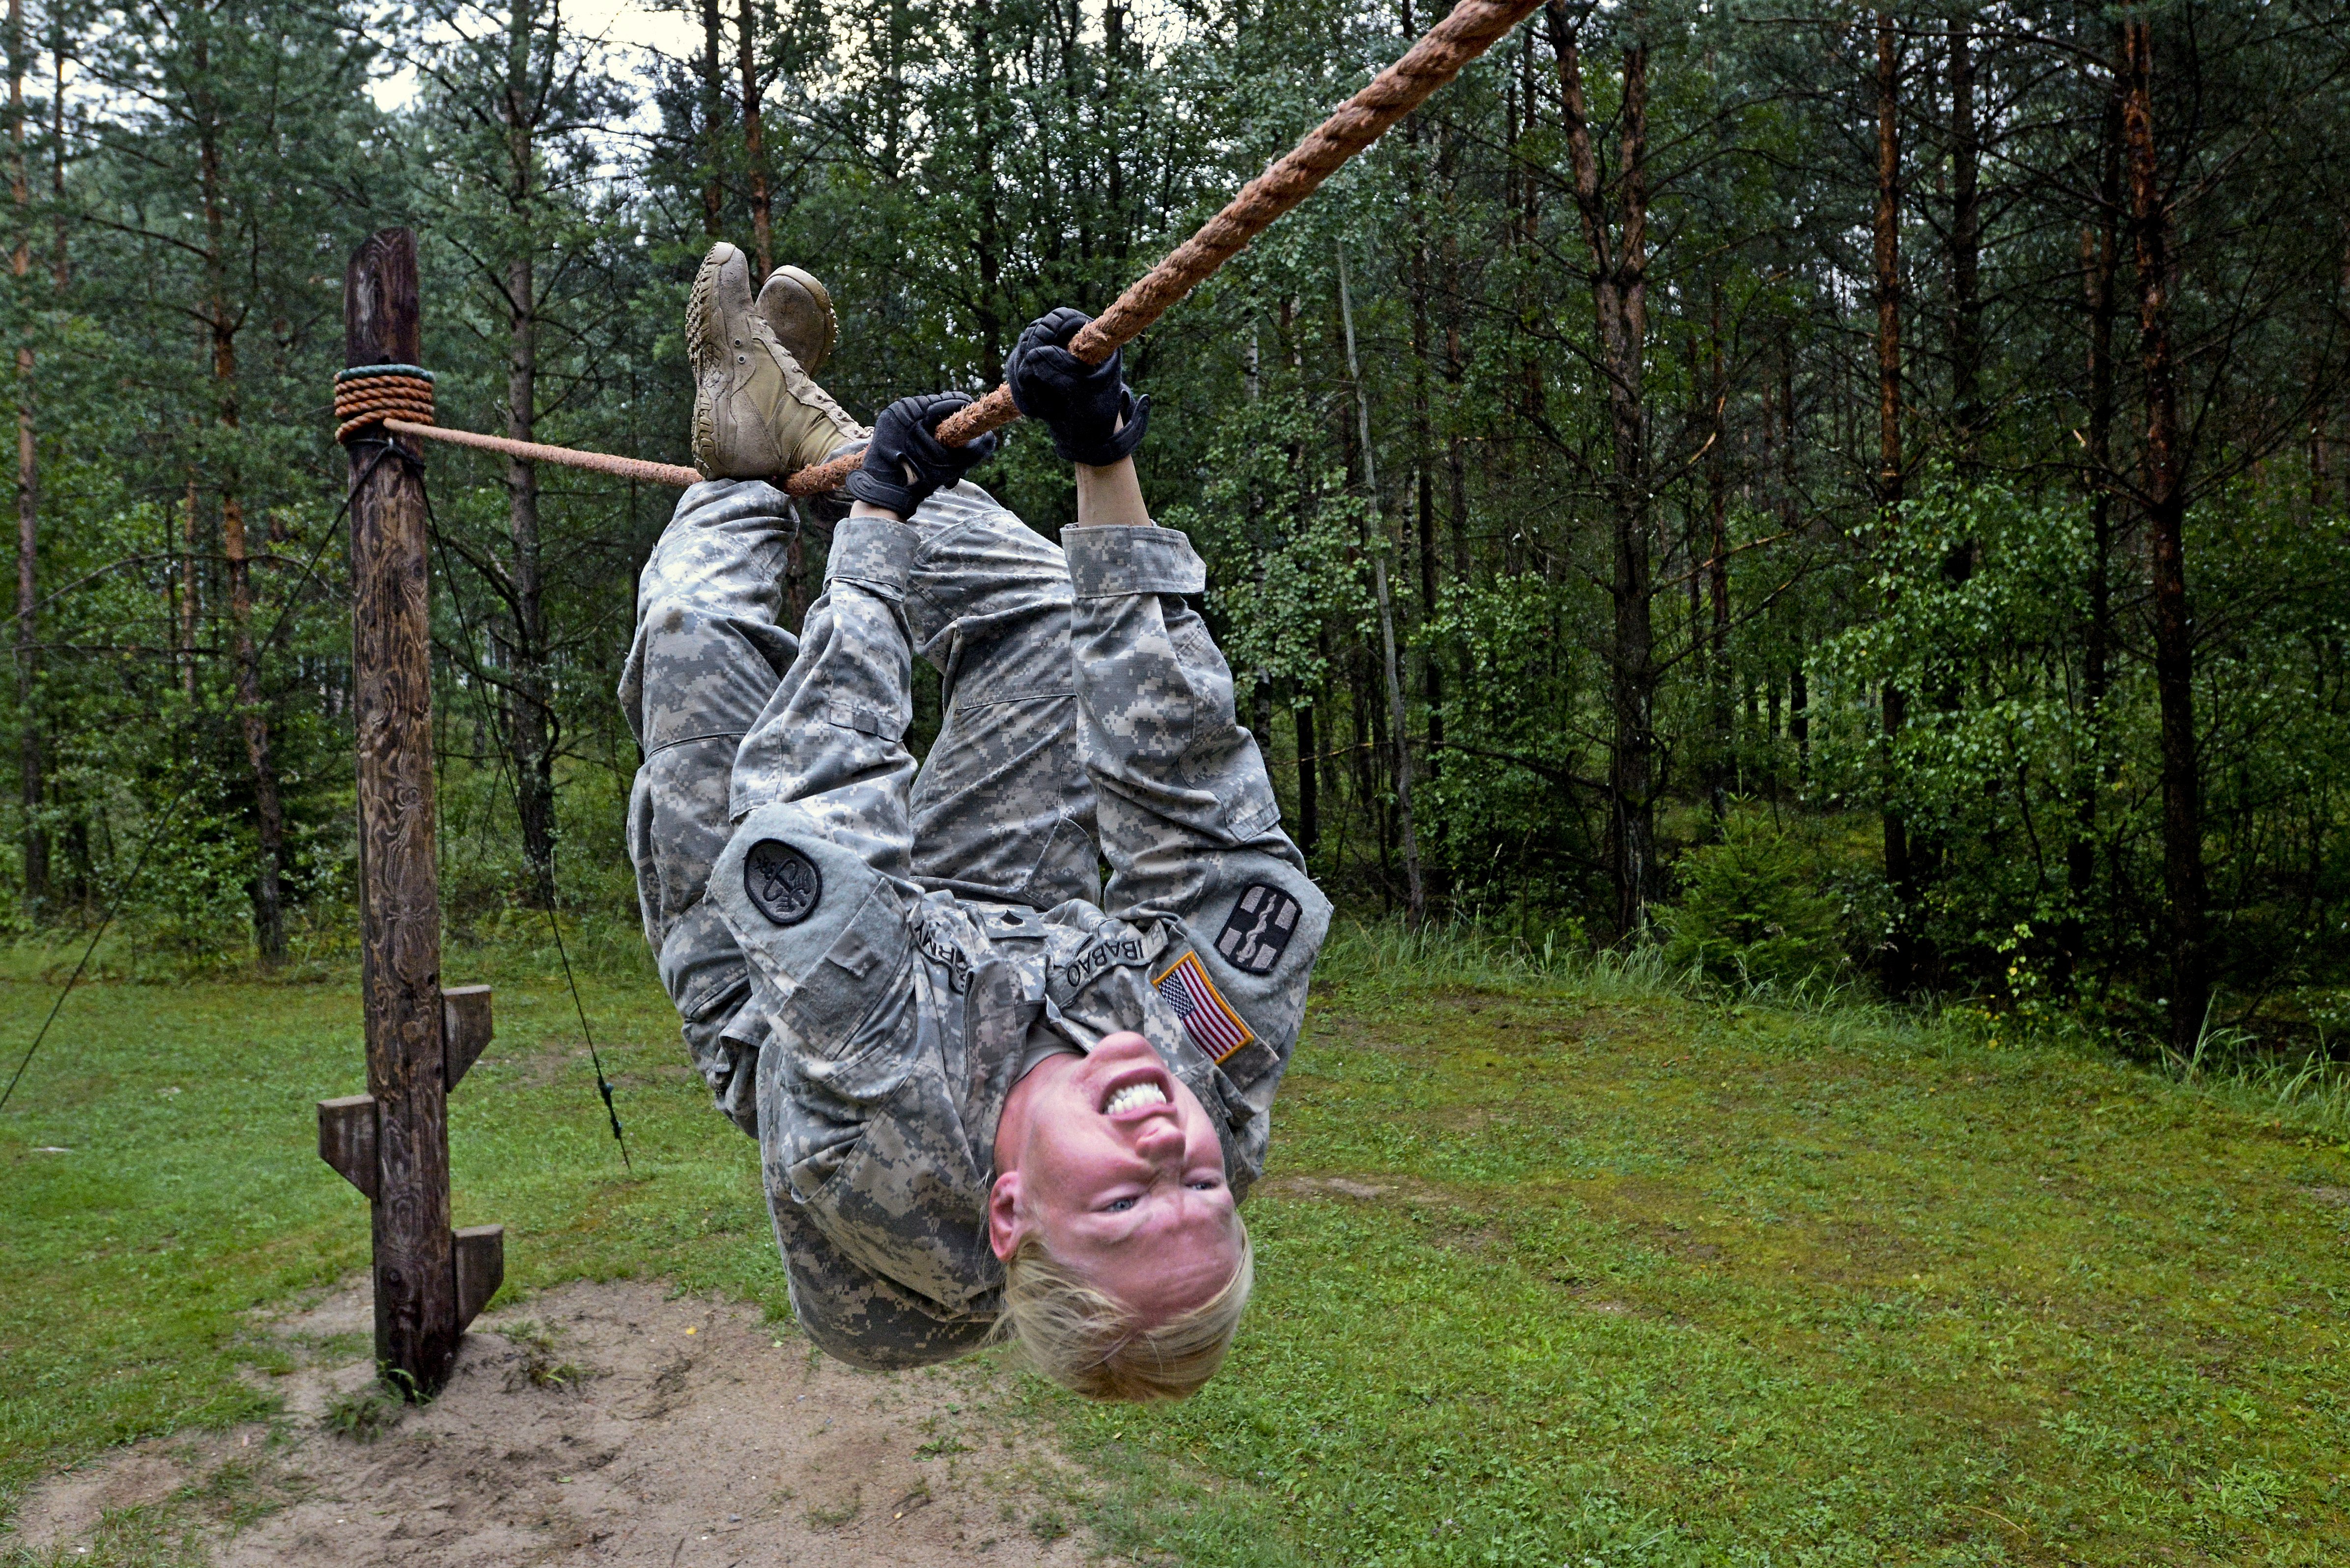 U.S. Army Spc. Elizabeth Ibabao crosses a rope bridge on the obstacle  course during U.S. Army